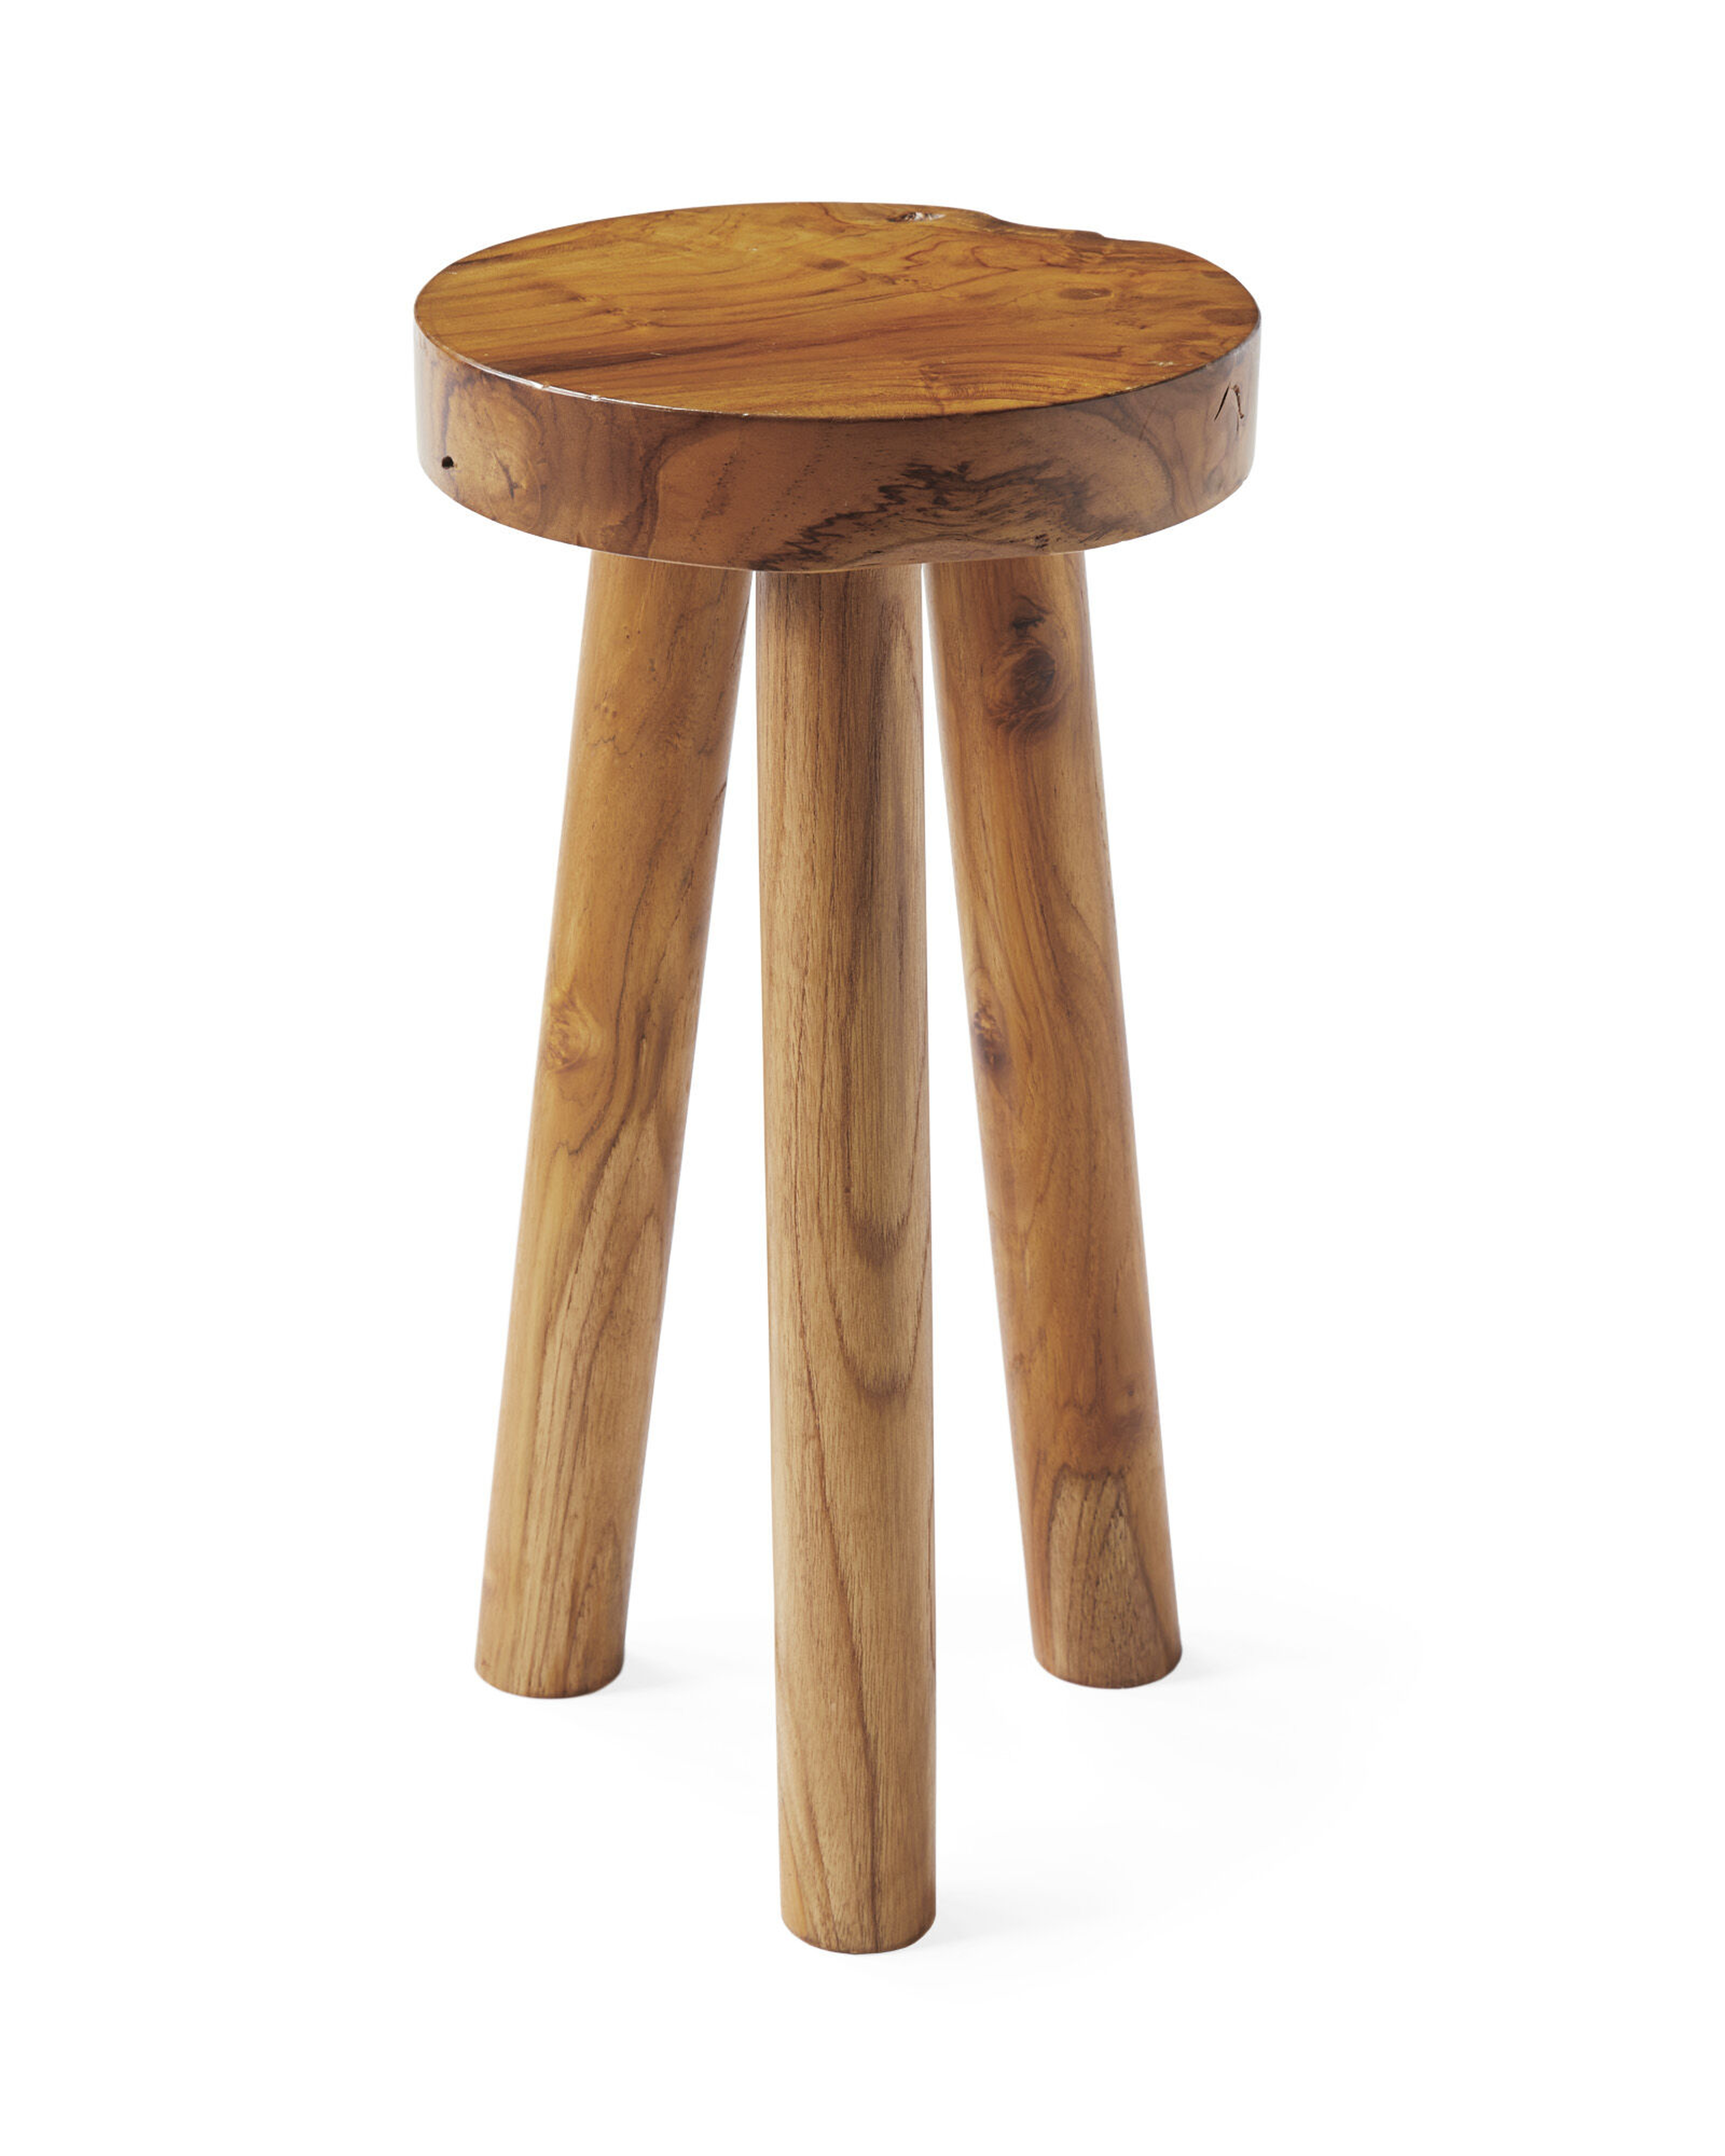 Teak Stool - Serena and Lily